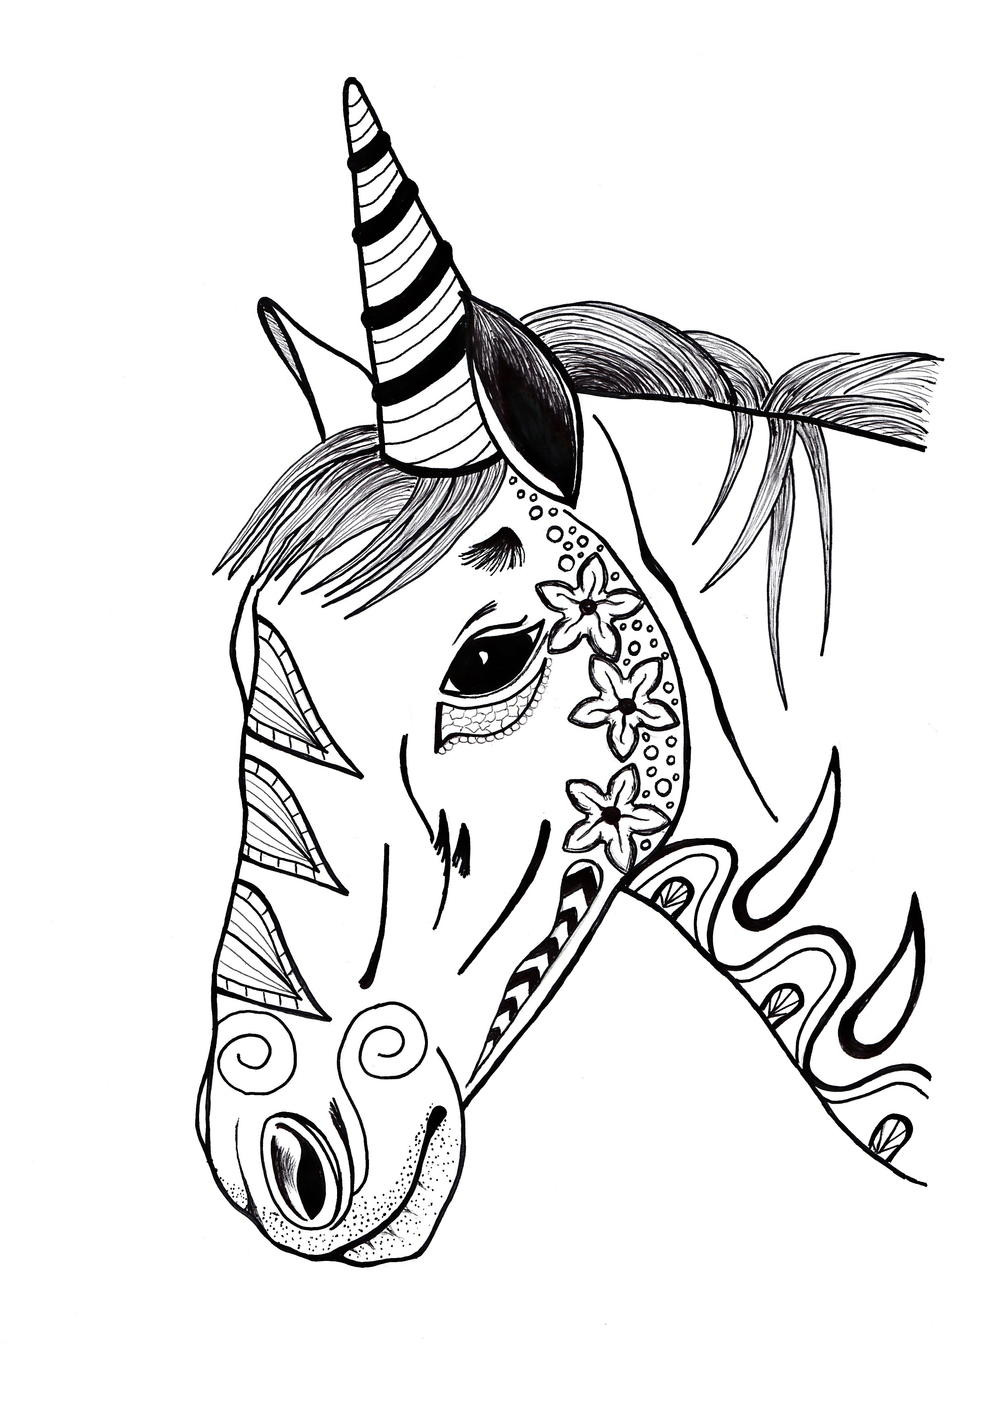 Adult Coloring Pages Pdf Free
 Unicorn Coloring Page PDF Download